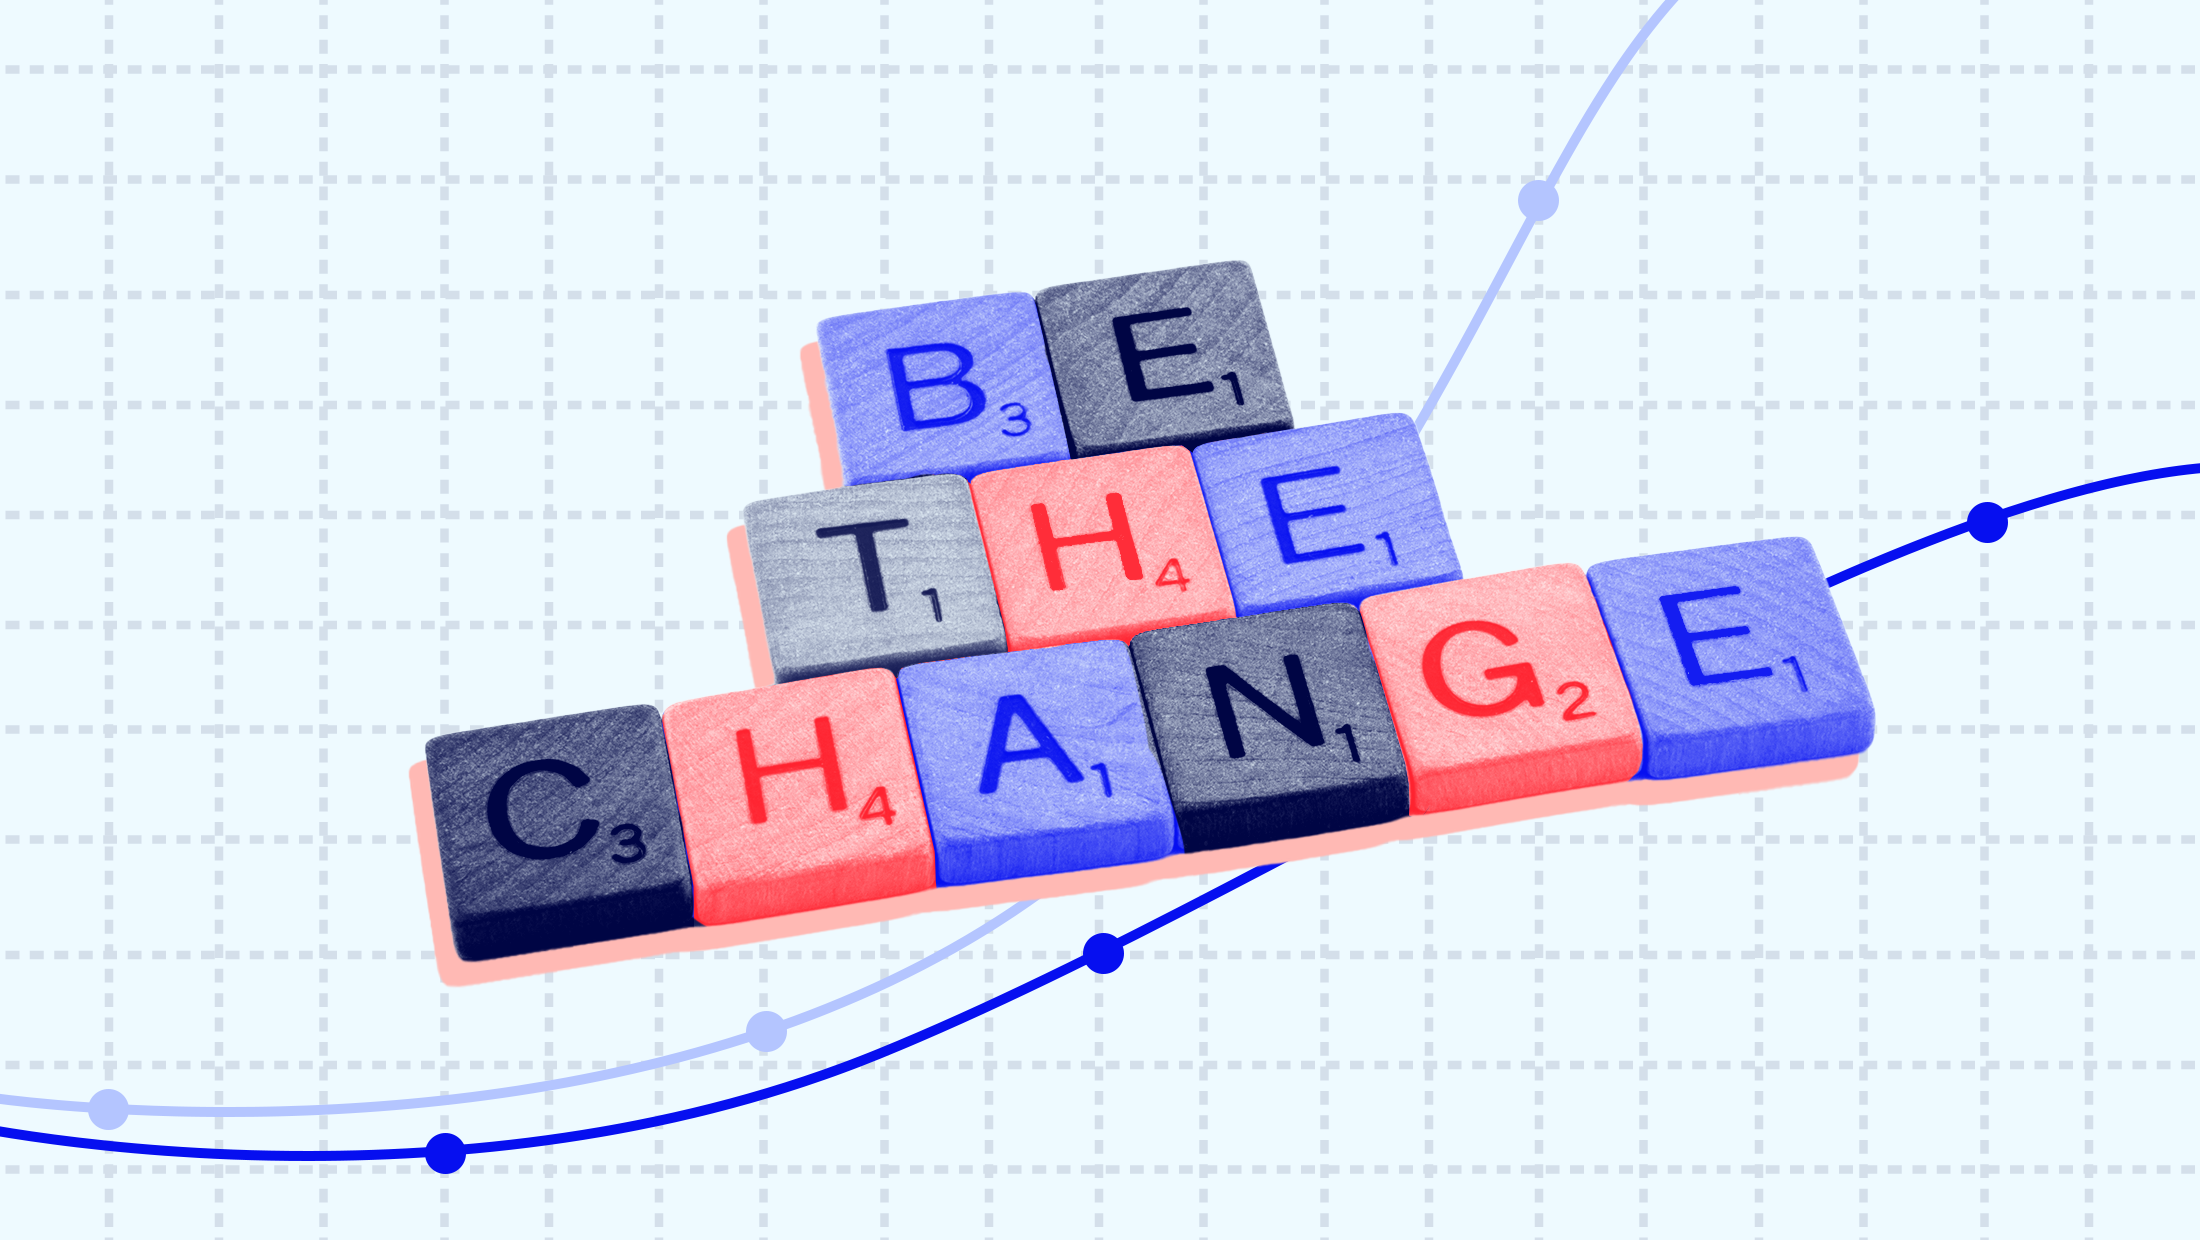 Red and white-tinted Scrabble tiles that spell "BE THE CHANGE," mounted on a piece of graph paper with various data points